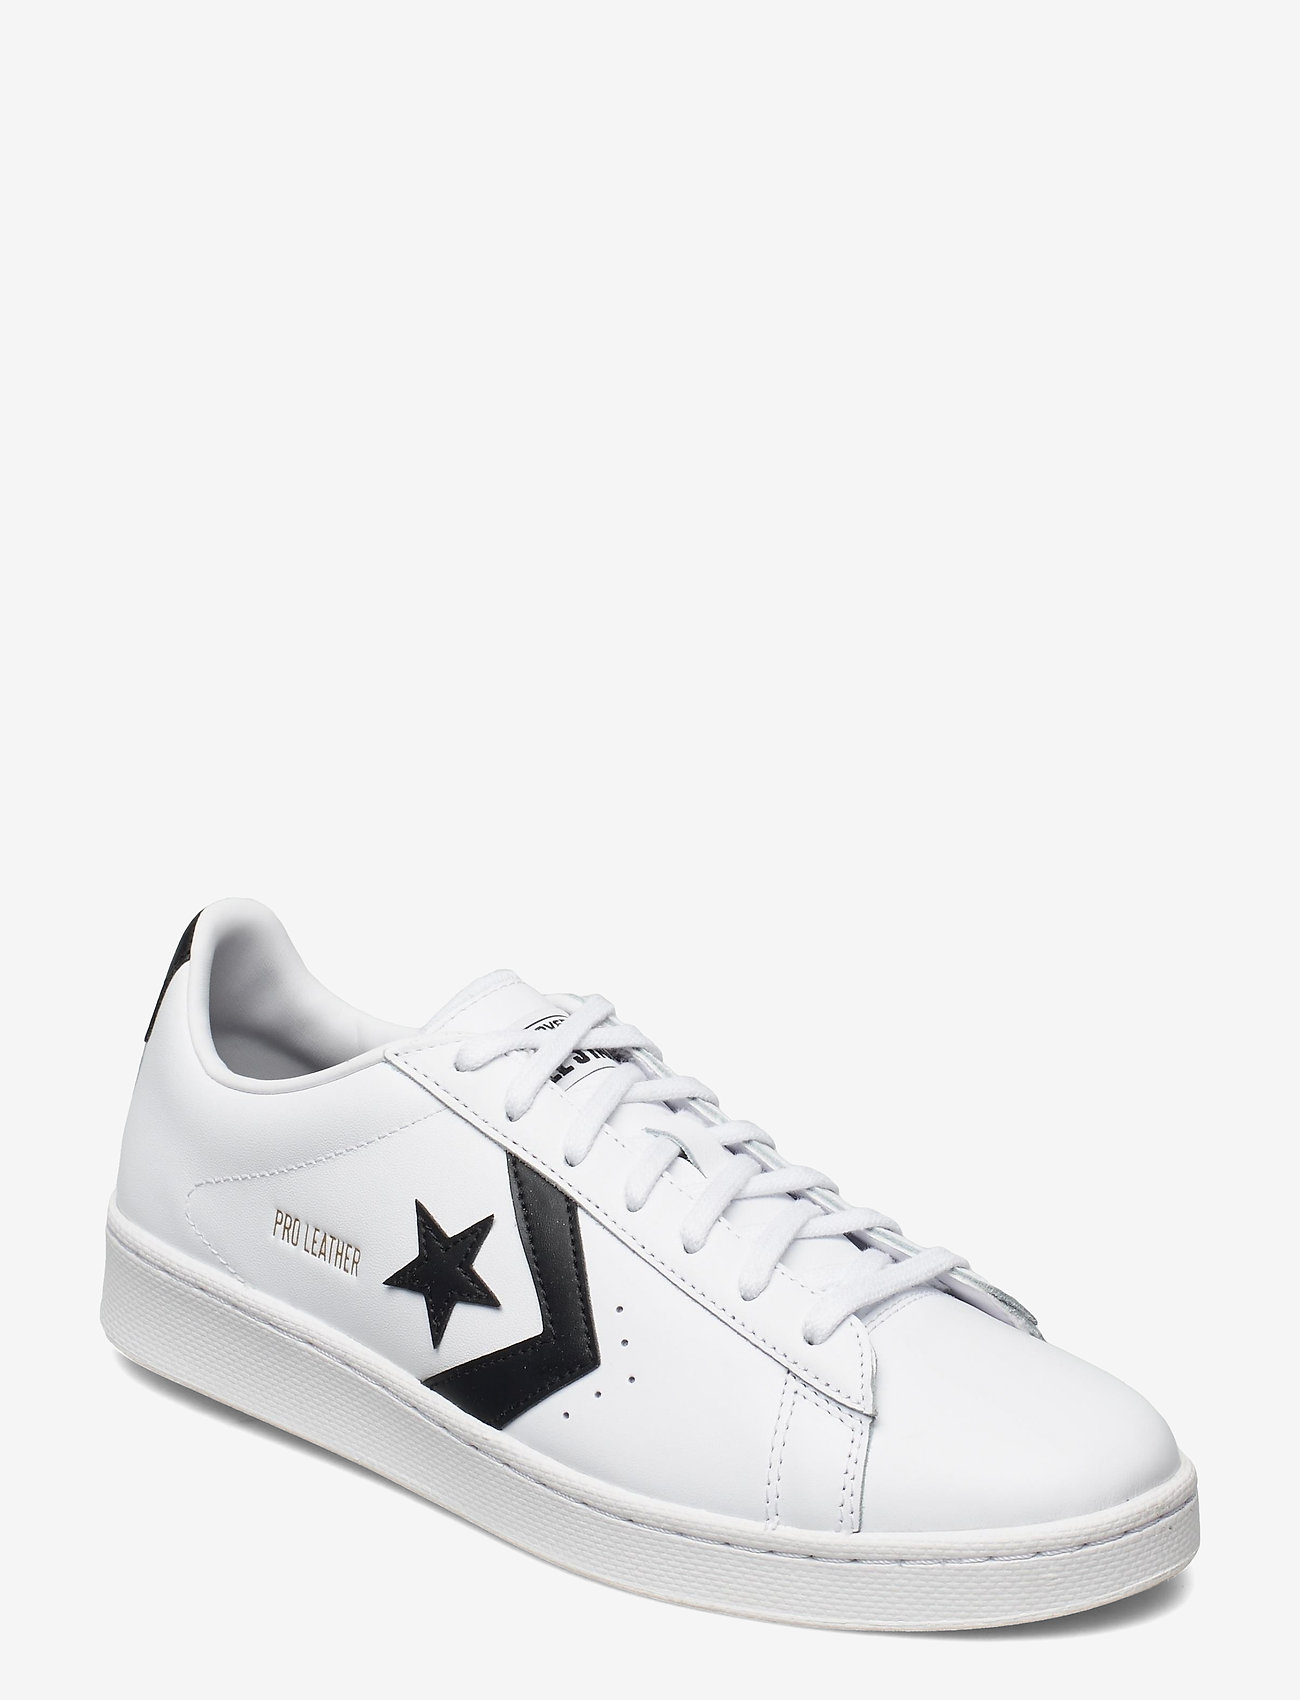 converse pro leather low